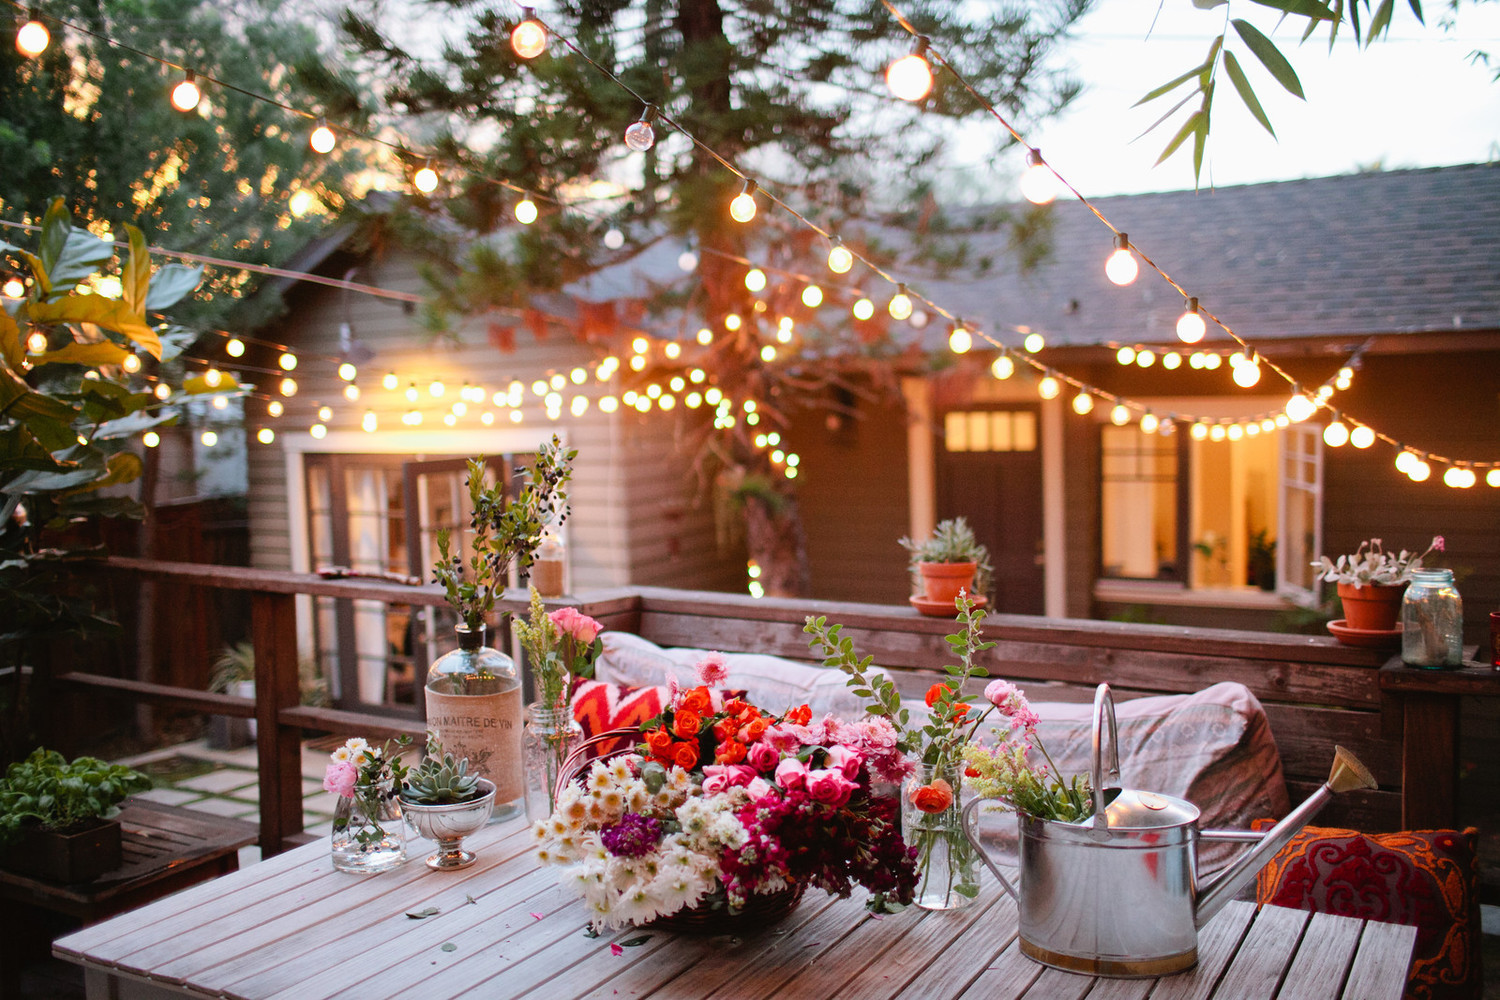 Backyard Party Ideas Lighting
 A New Pergola on the Deck from Thrifty Decor Chick